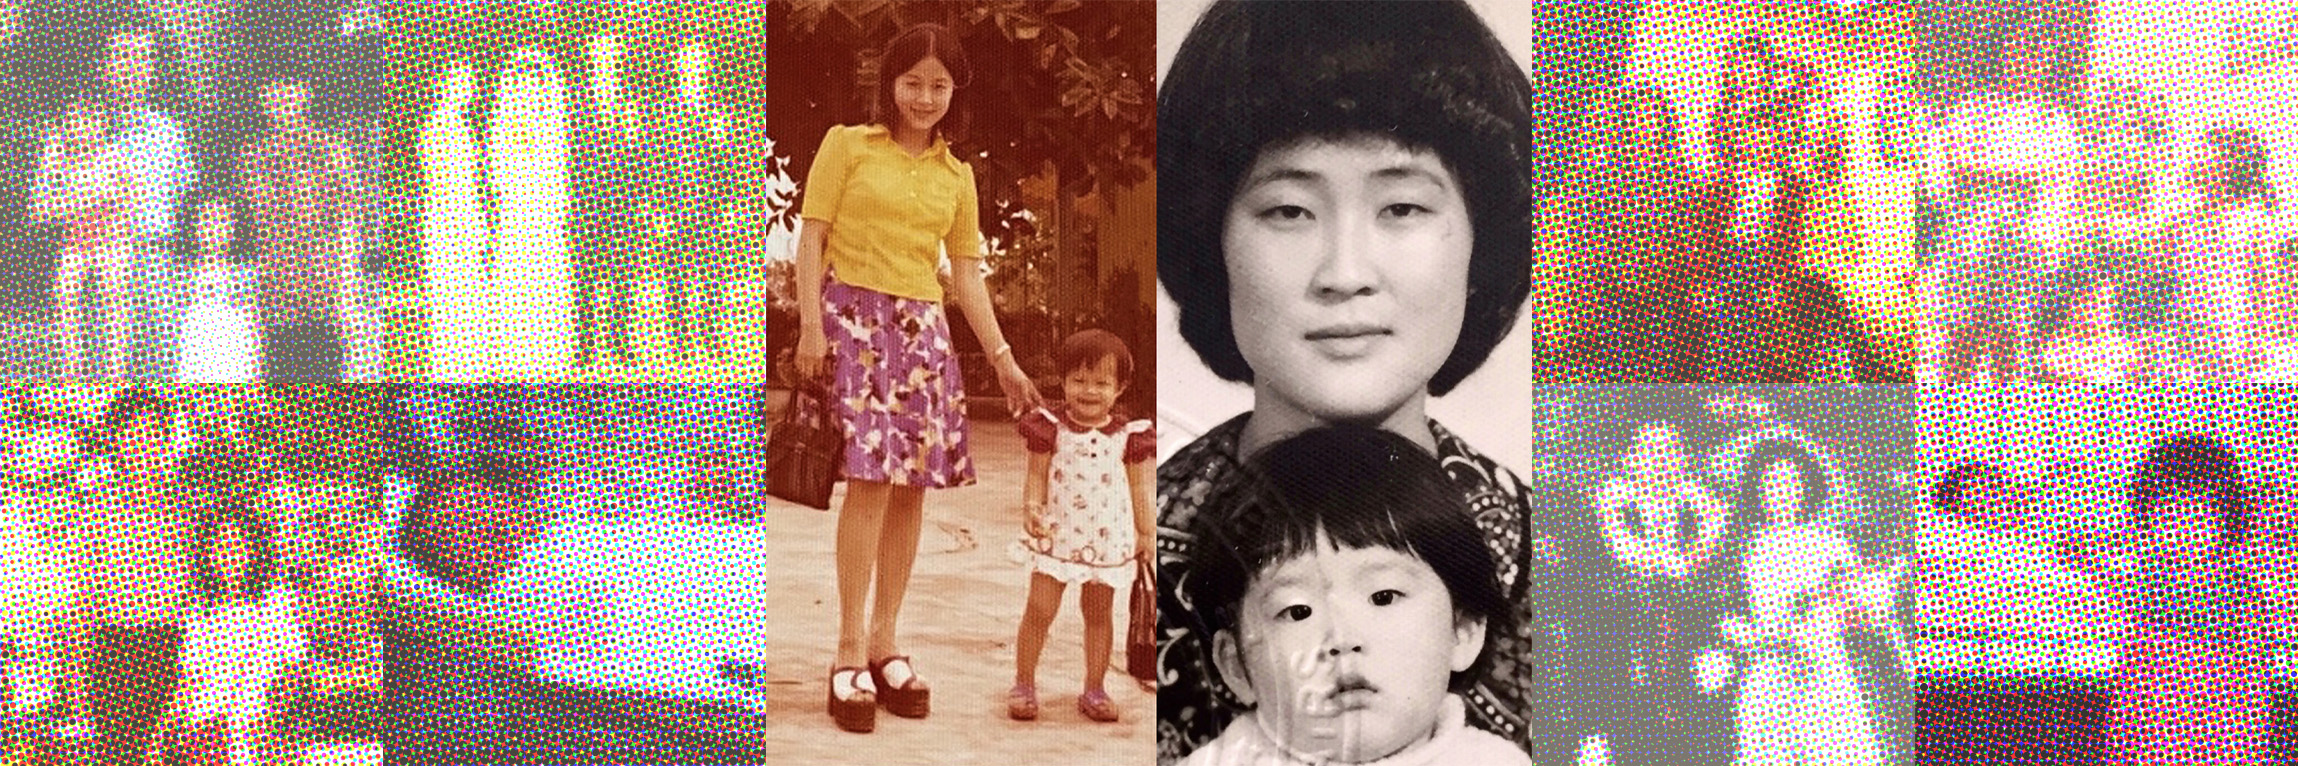 A collage of images of Lao- and Korean-American families from the 1970s, with most faces pixelated.